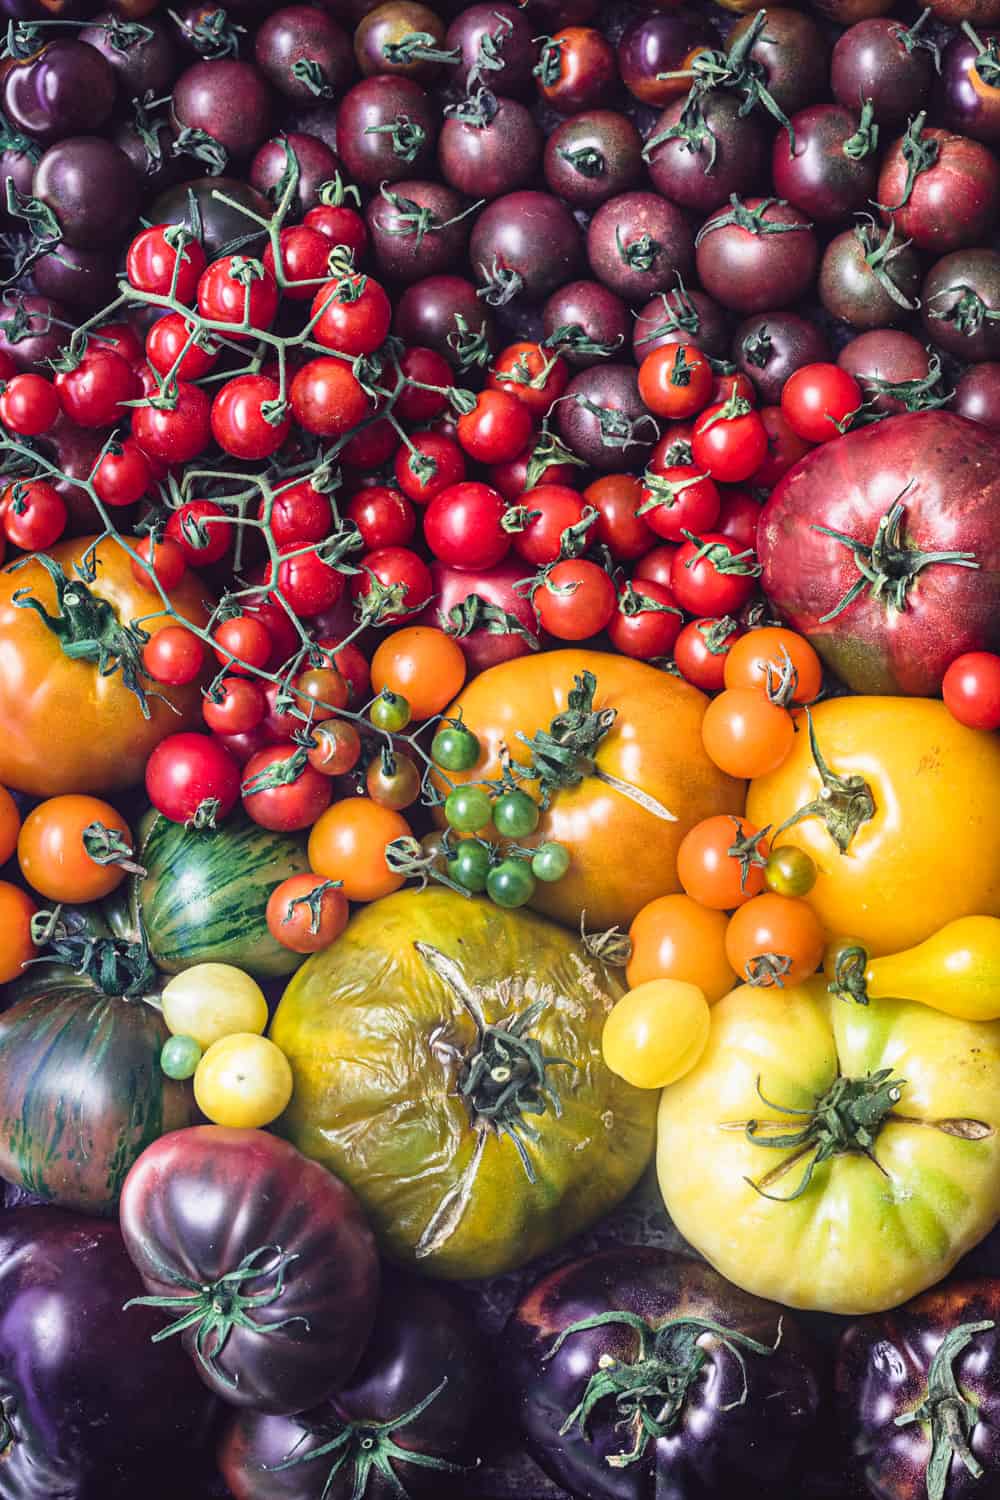 Medicinal Tomatoes Are Grown in Cherkasy Region